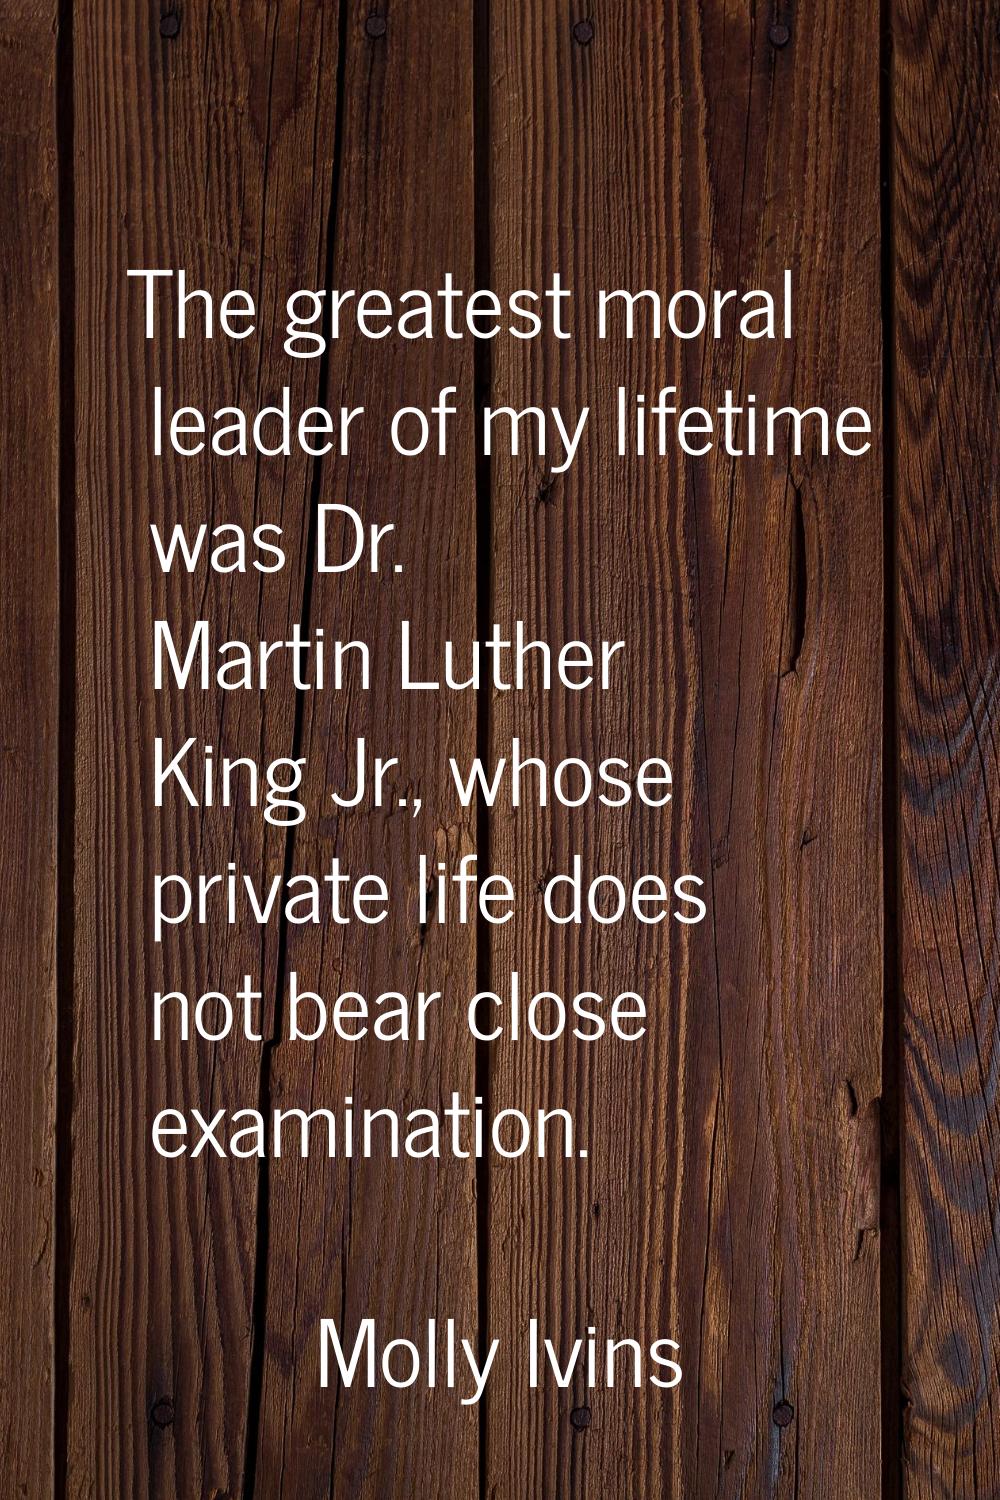 The greatest moral leader of my lifetime was Dr. Martin Luther King Jr., whose private life does no